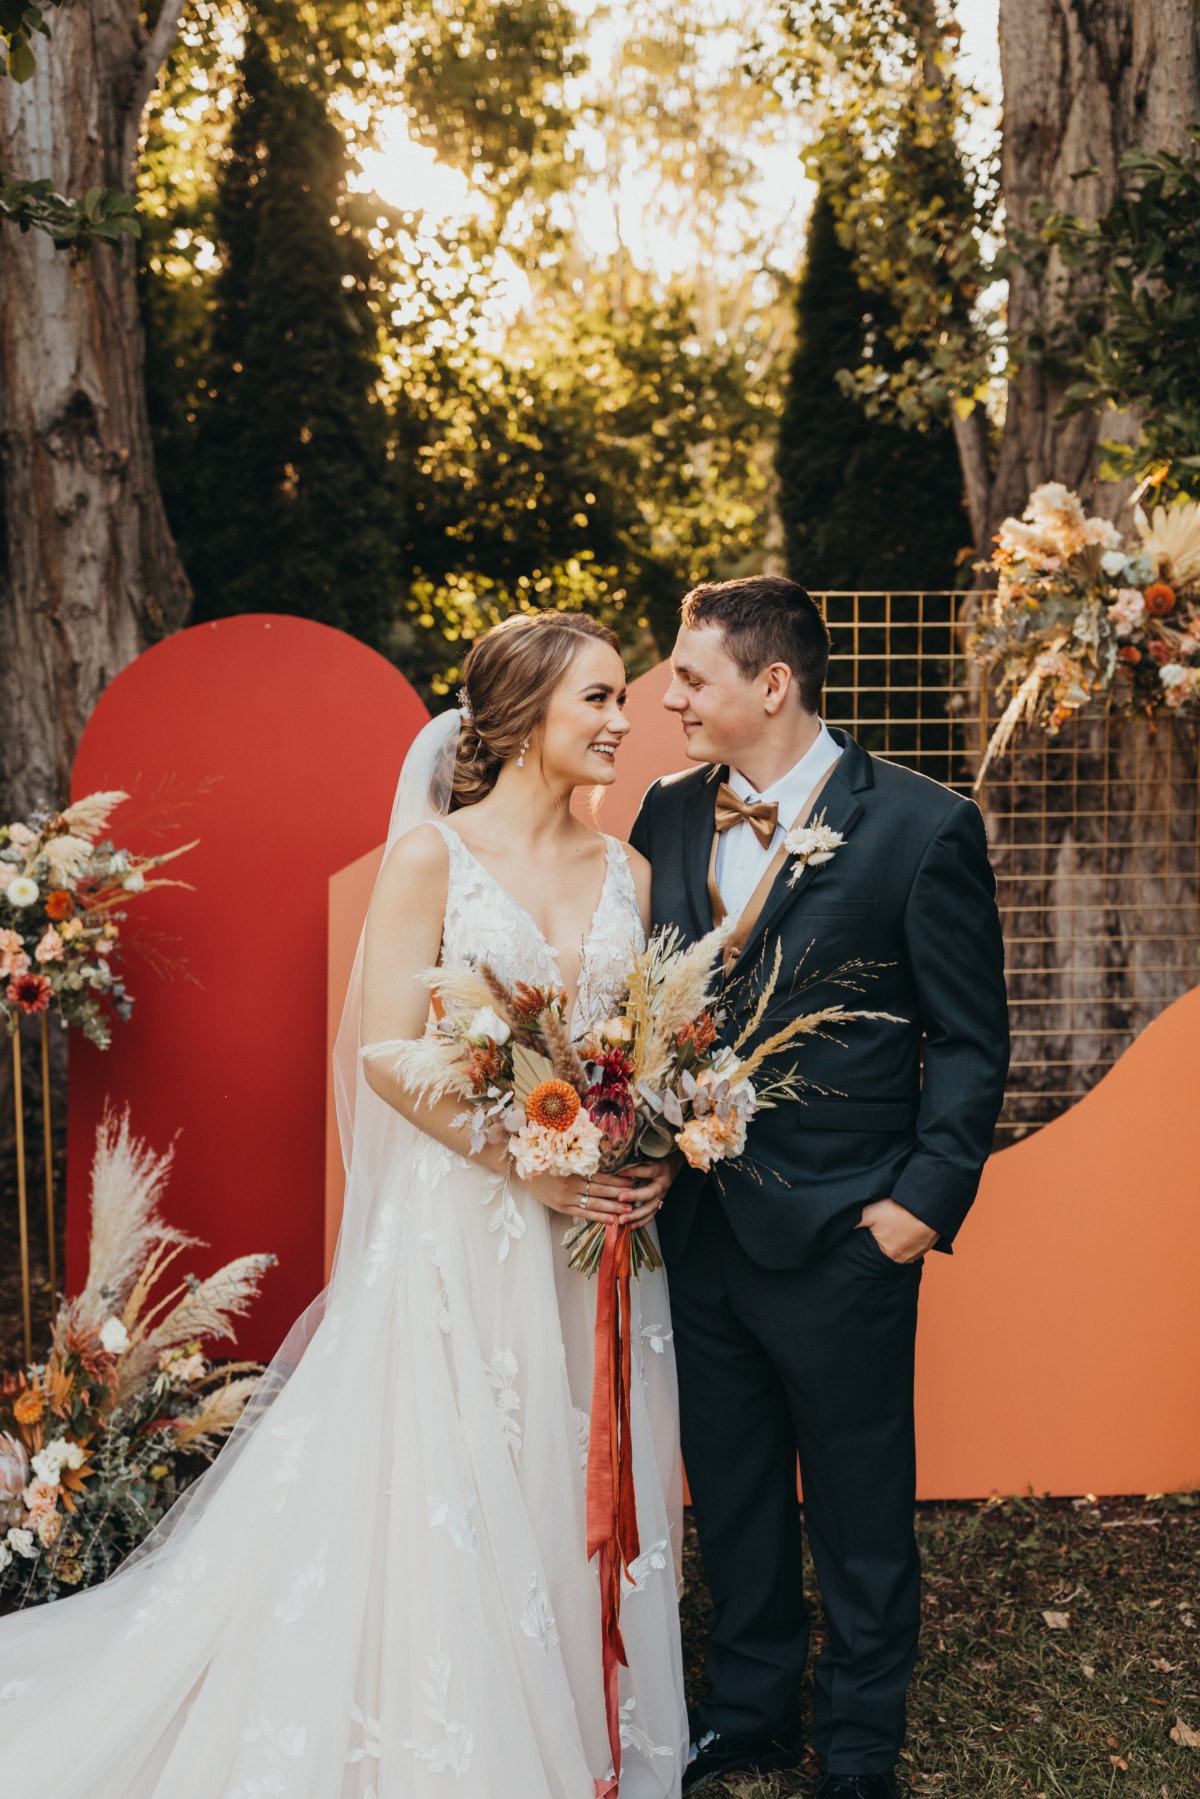 This West Yakima Valley Wedding Shoot Mixes All the Best Trends for a Major Modern Boho Look